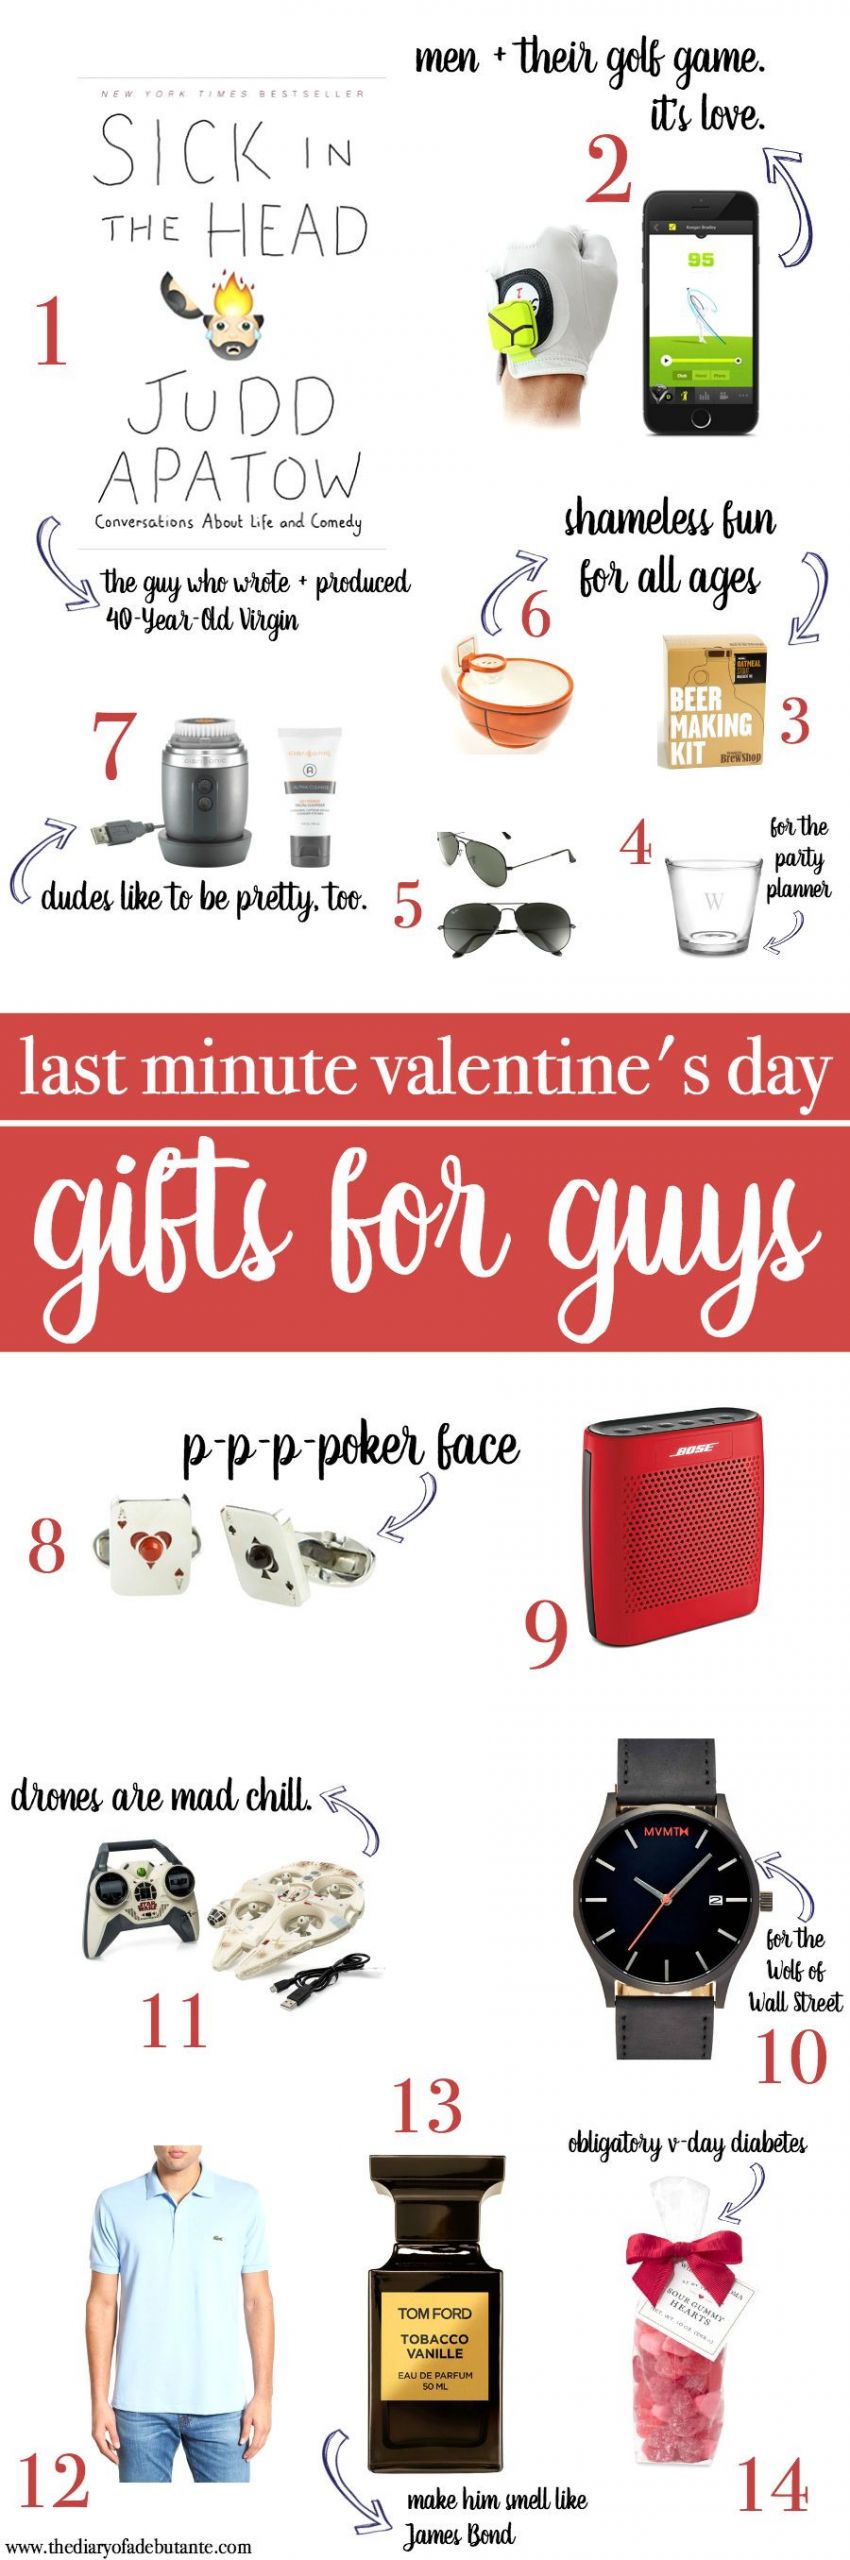 Valentine'S Day Gift Ideas For Boys
 Last Minute Gift Ideas for Guys